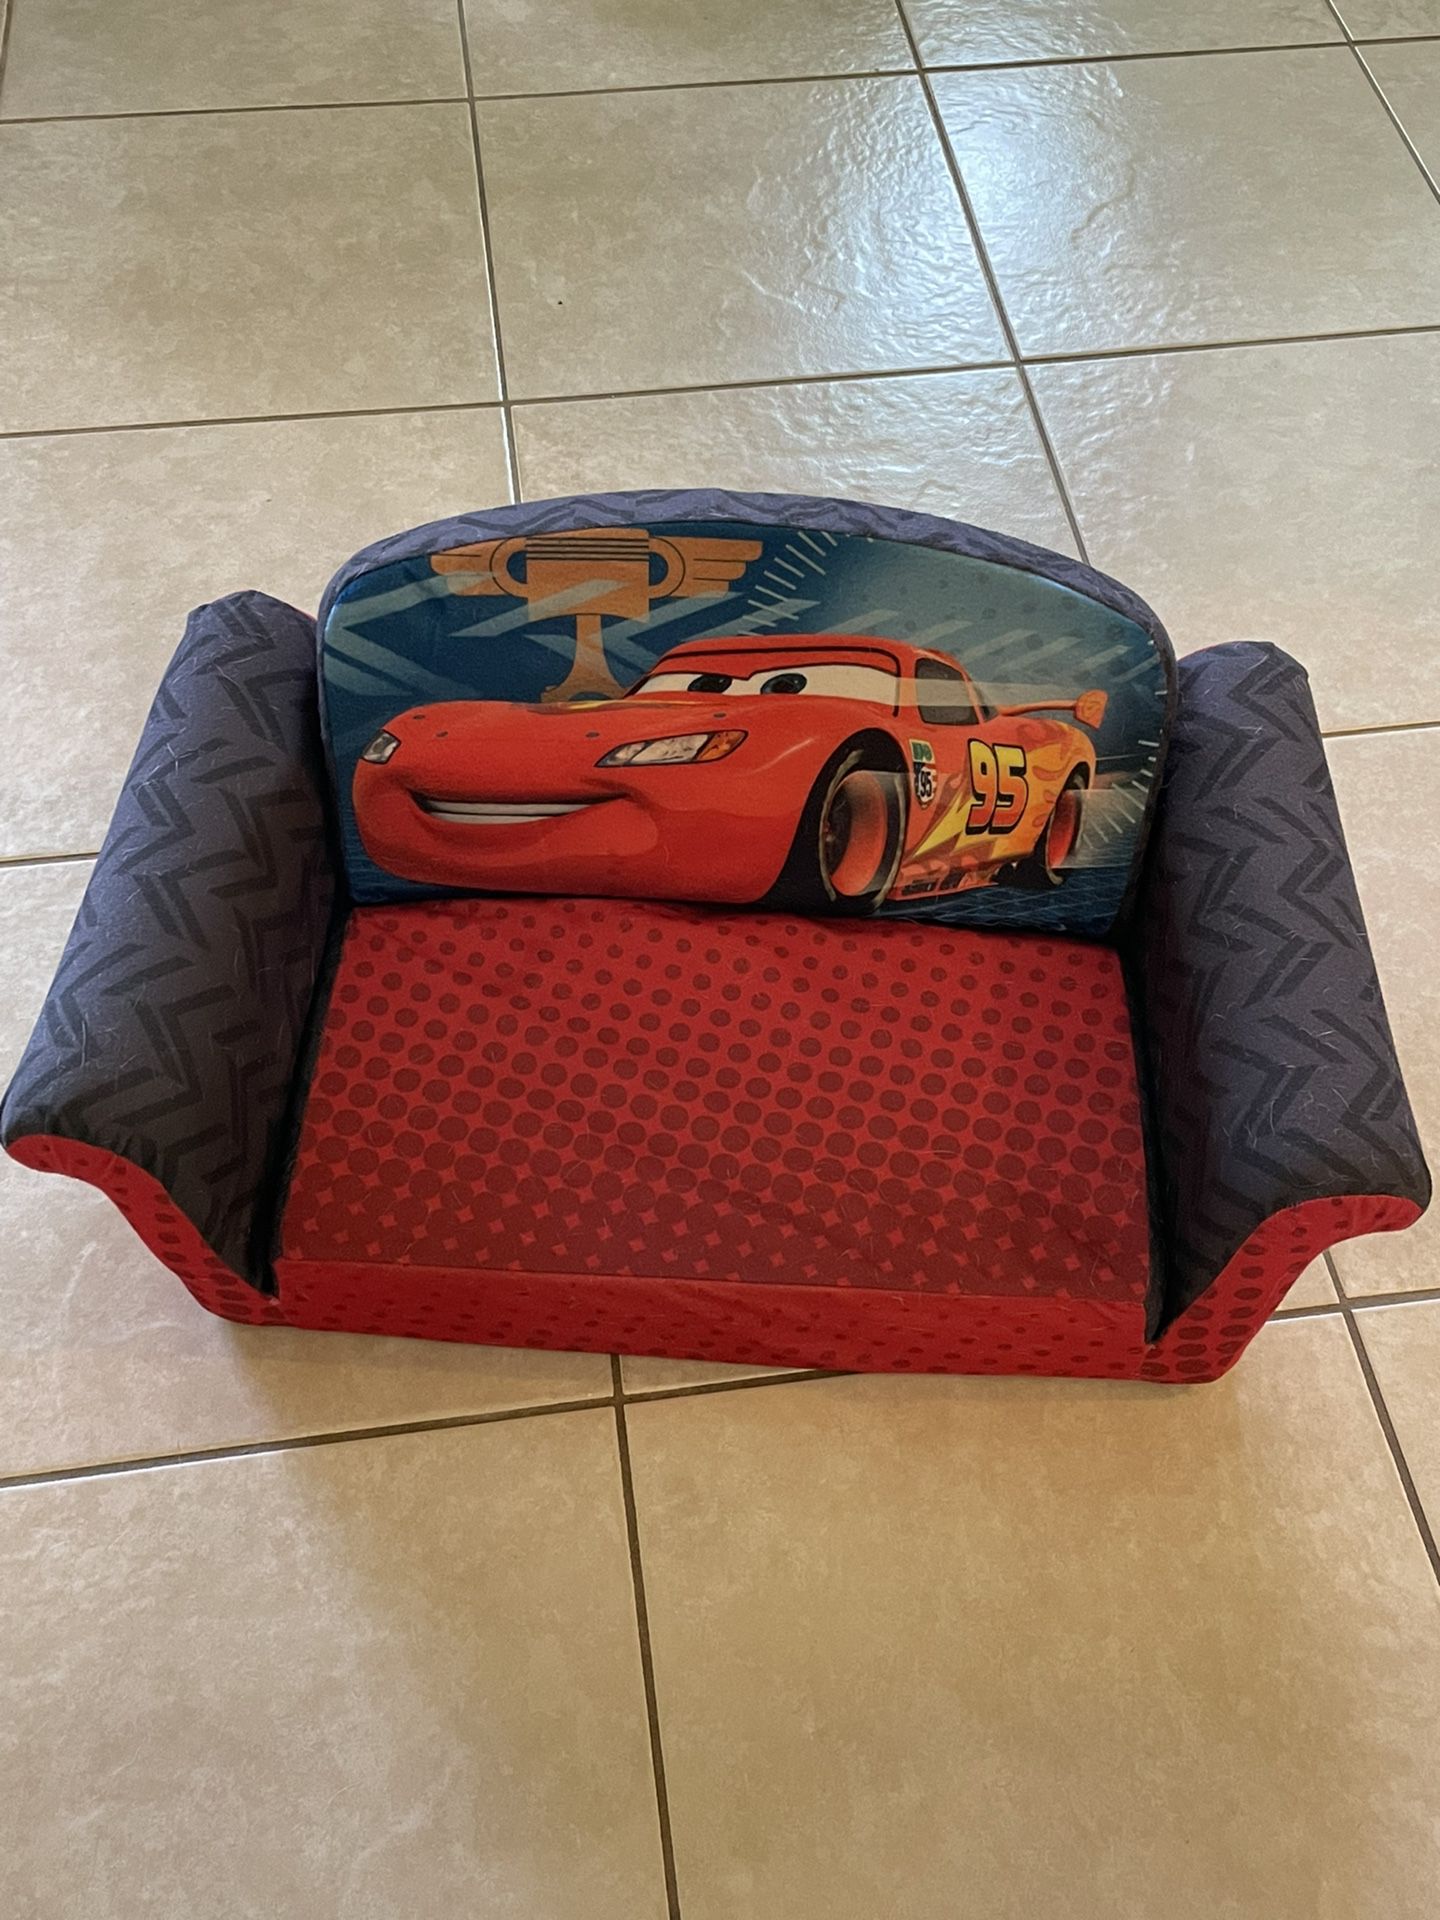 Cars Couch For Kids